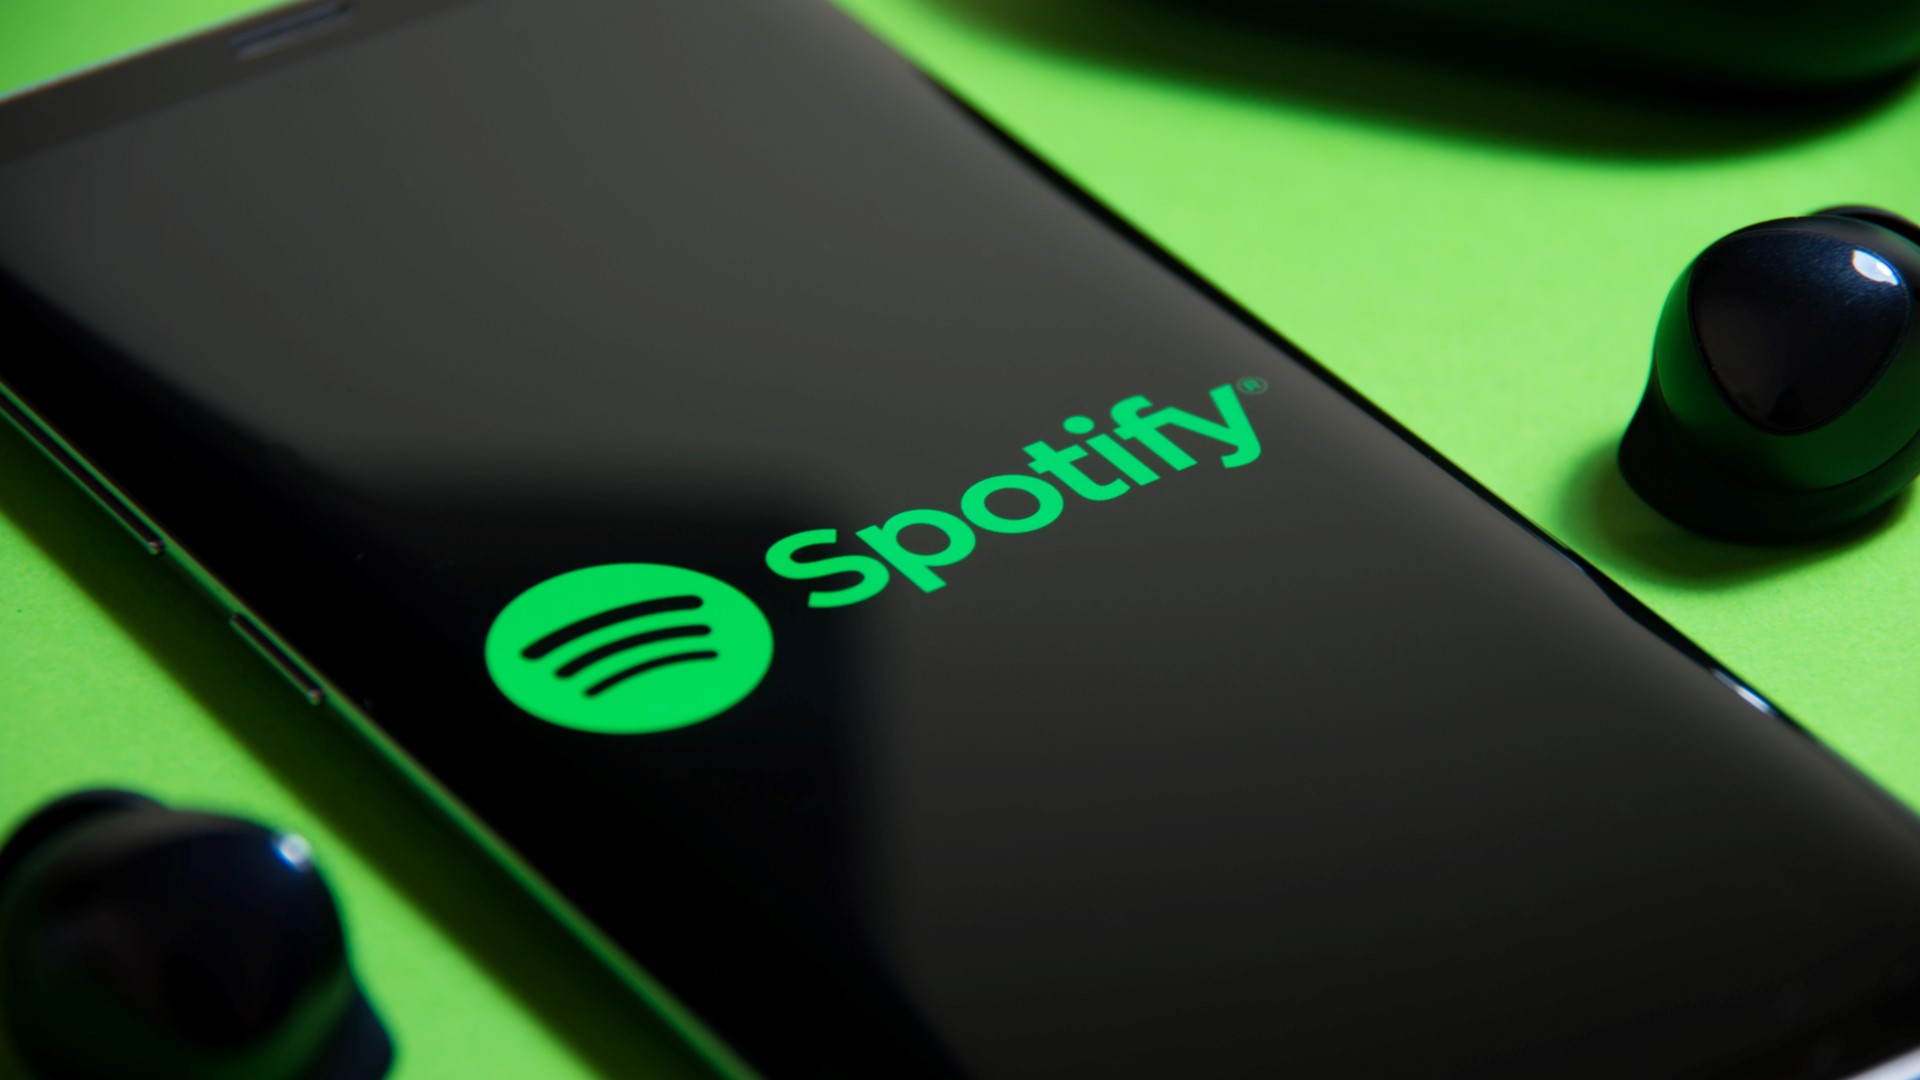 Spotify Premium prices go up to $10.99 a month for individuals